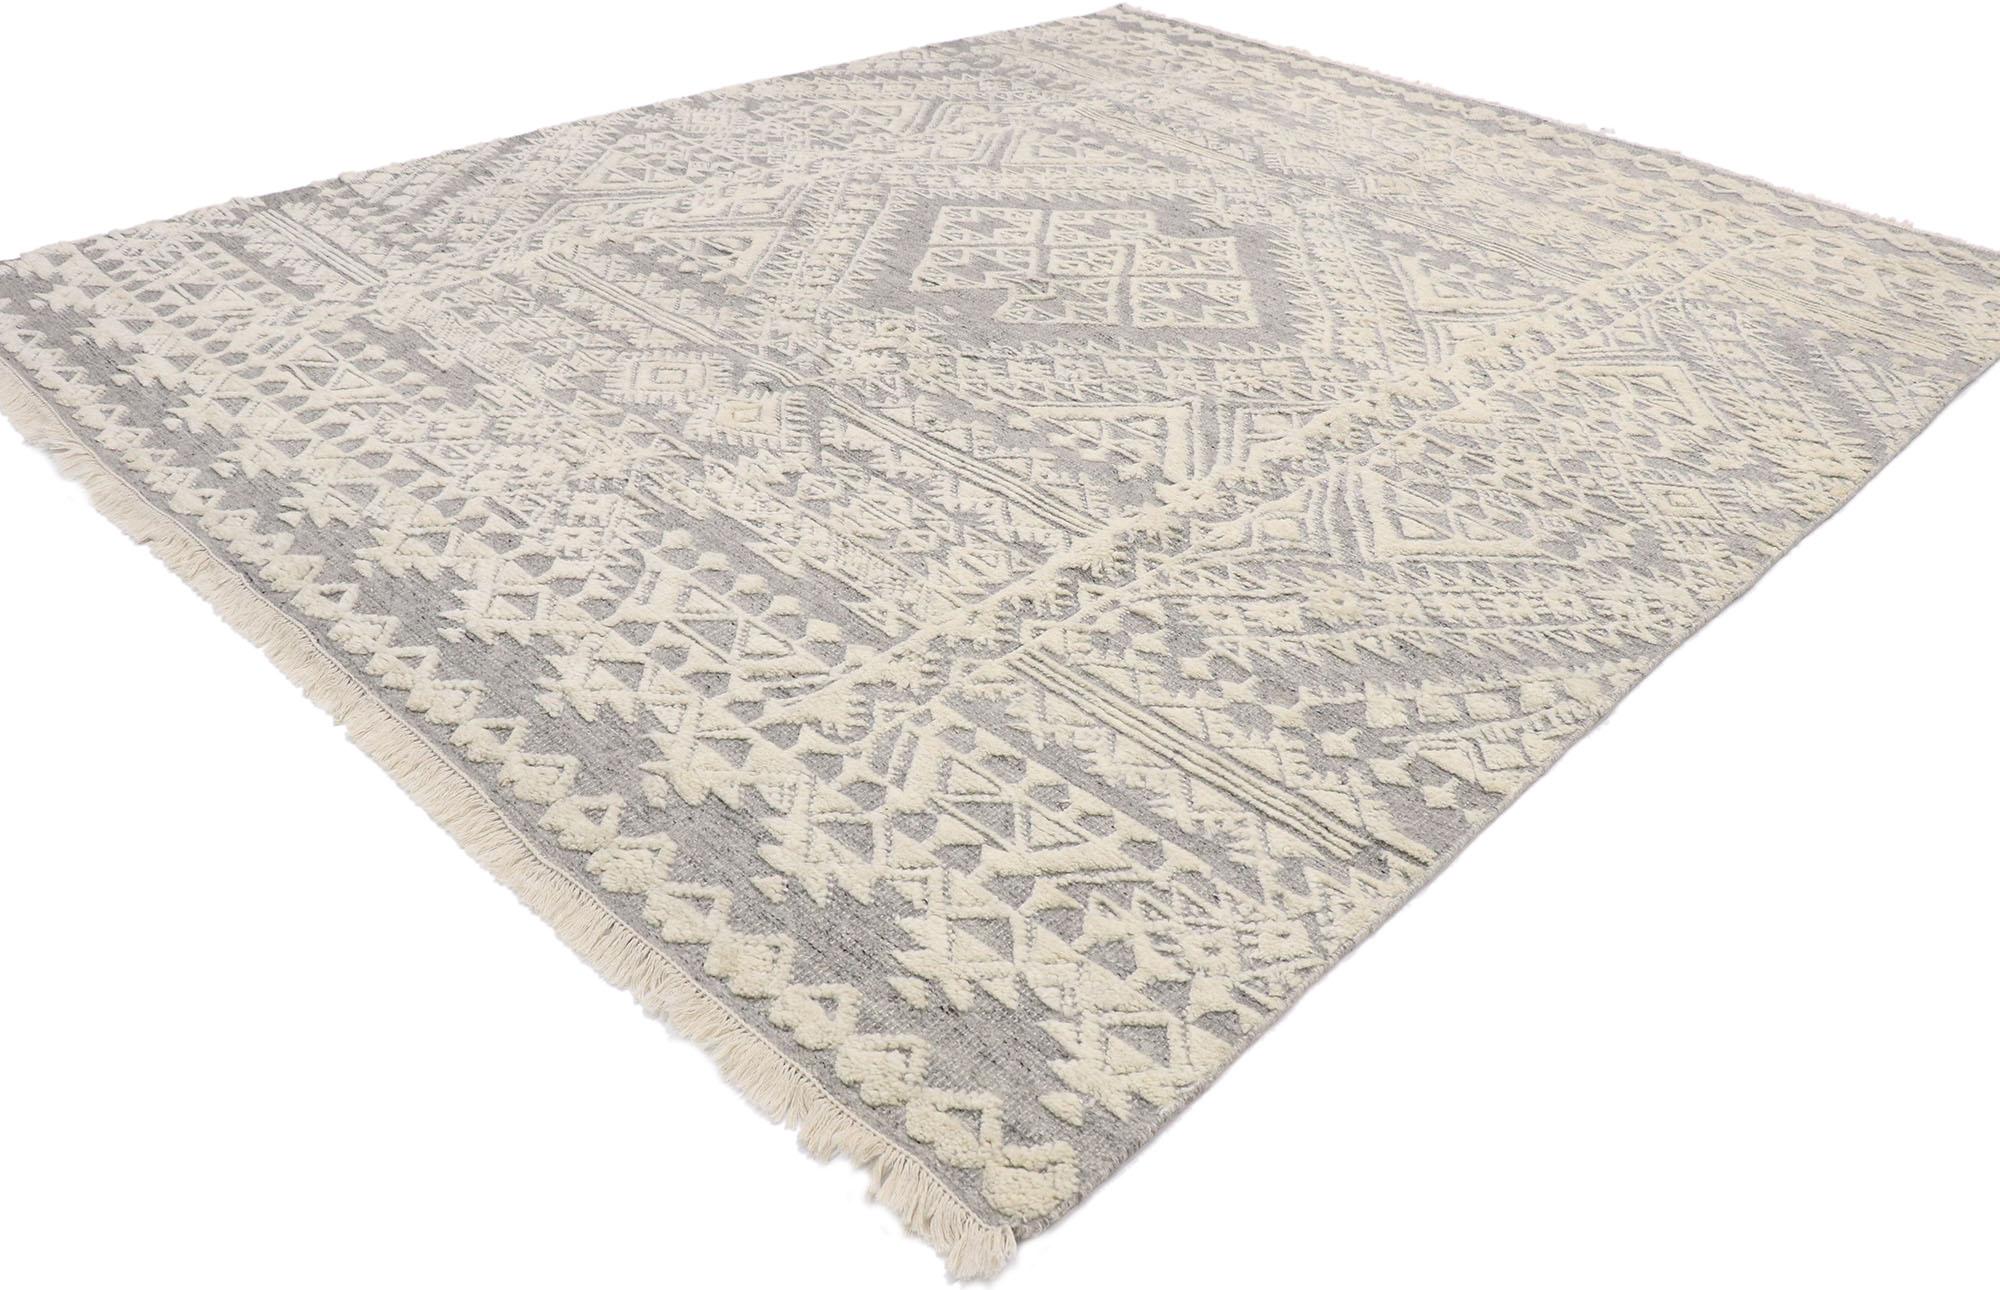 30557, new contemporary Moroccan Souf rug with Raised design and Modern style 09'10. This hand knotted wool new contemporary Moroccan Souf rug features a raised tribal pattern composed of diamonds, triangles, burdock motifs, serrated lozenges